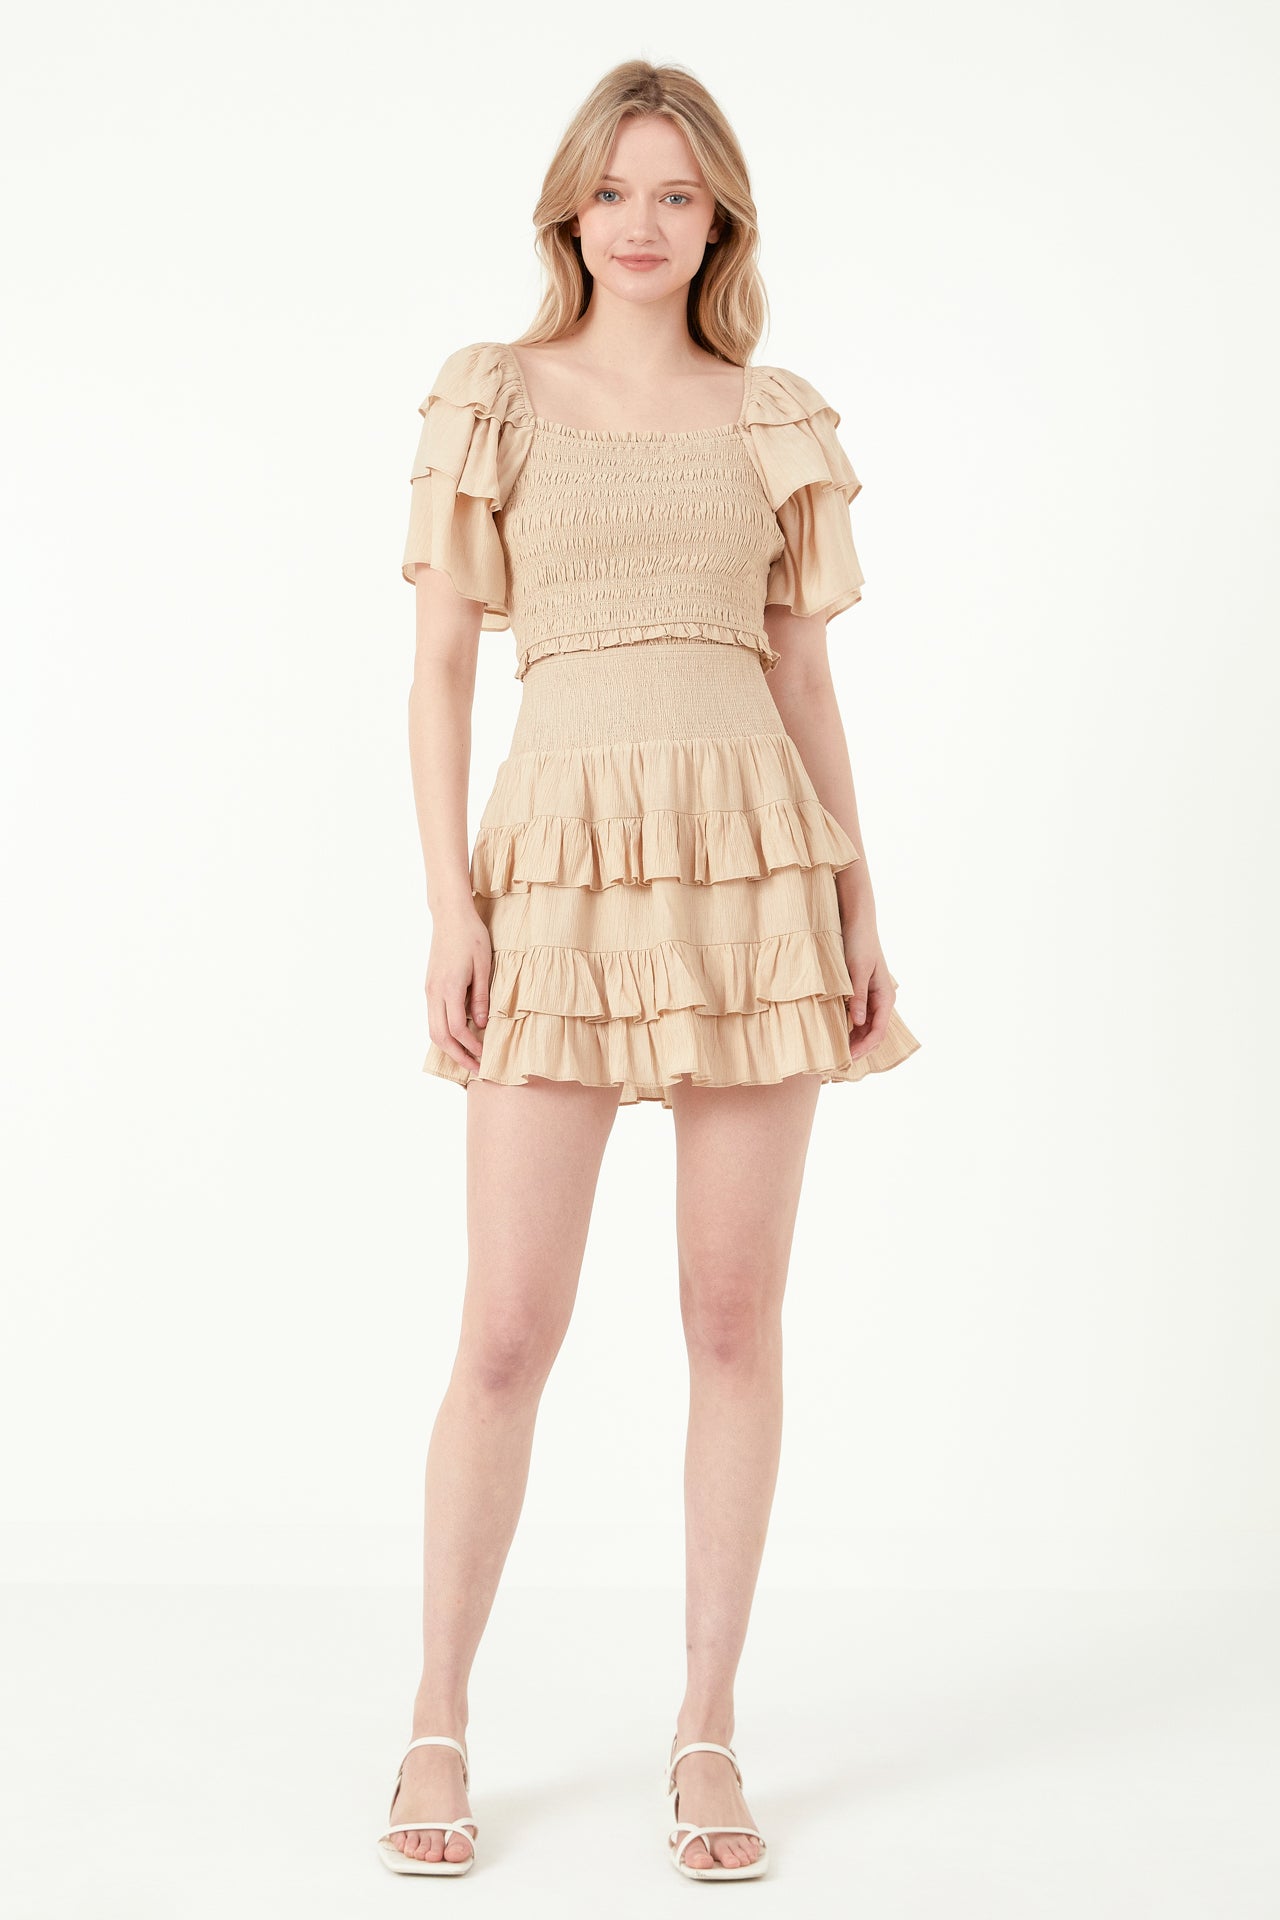 FREE THE ROSES - Smocked Ruffled Mini Skirt - SKIRTS available at Objectrare